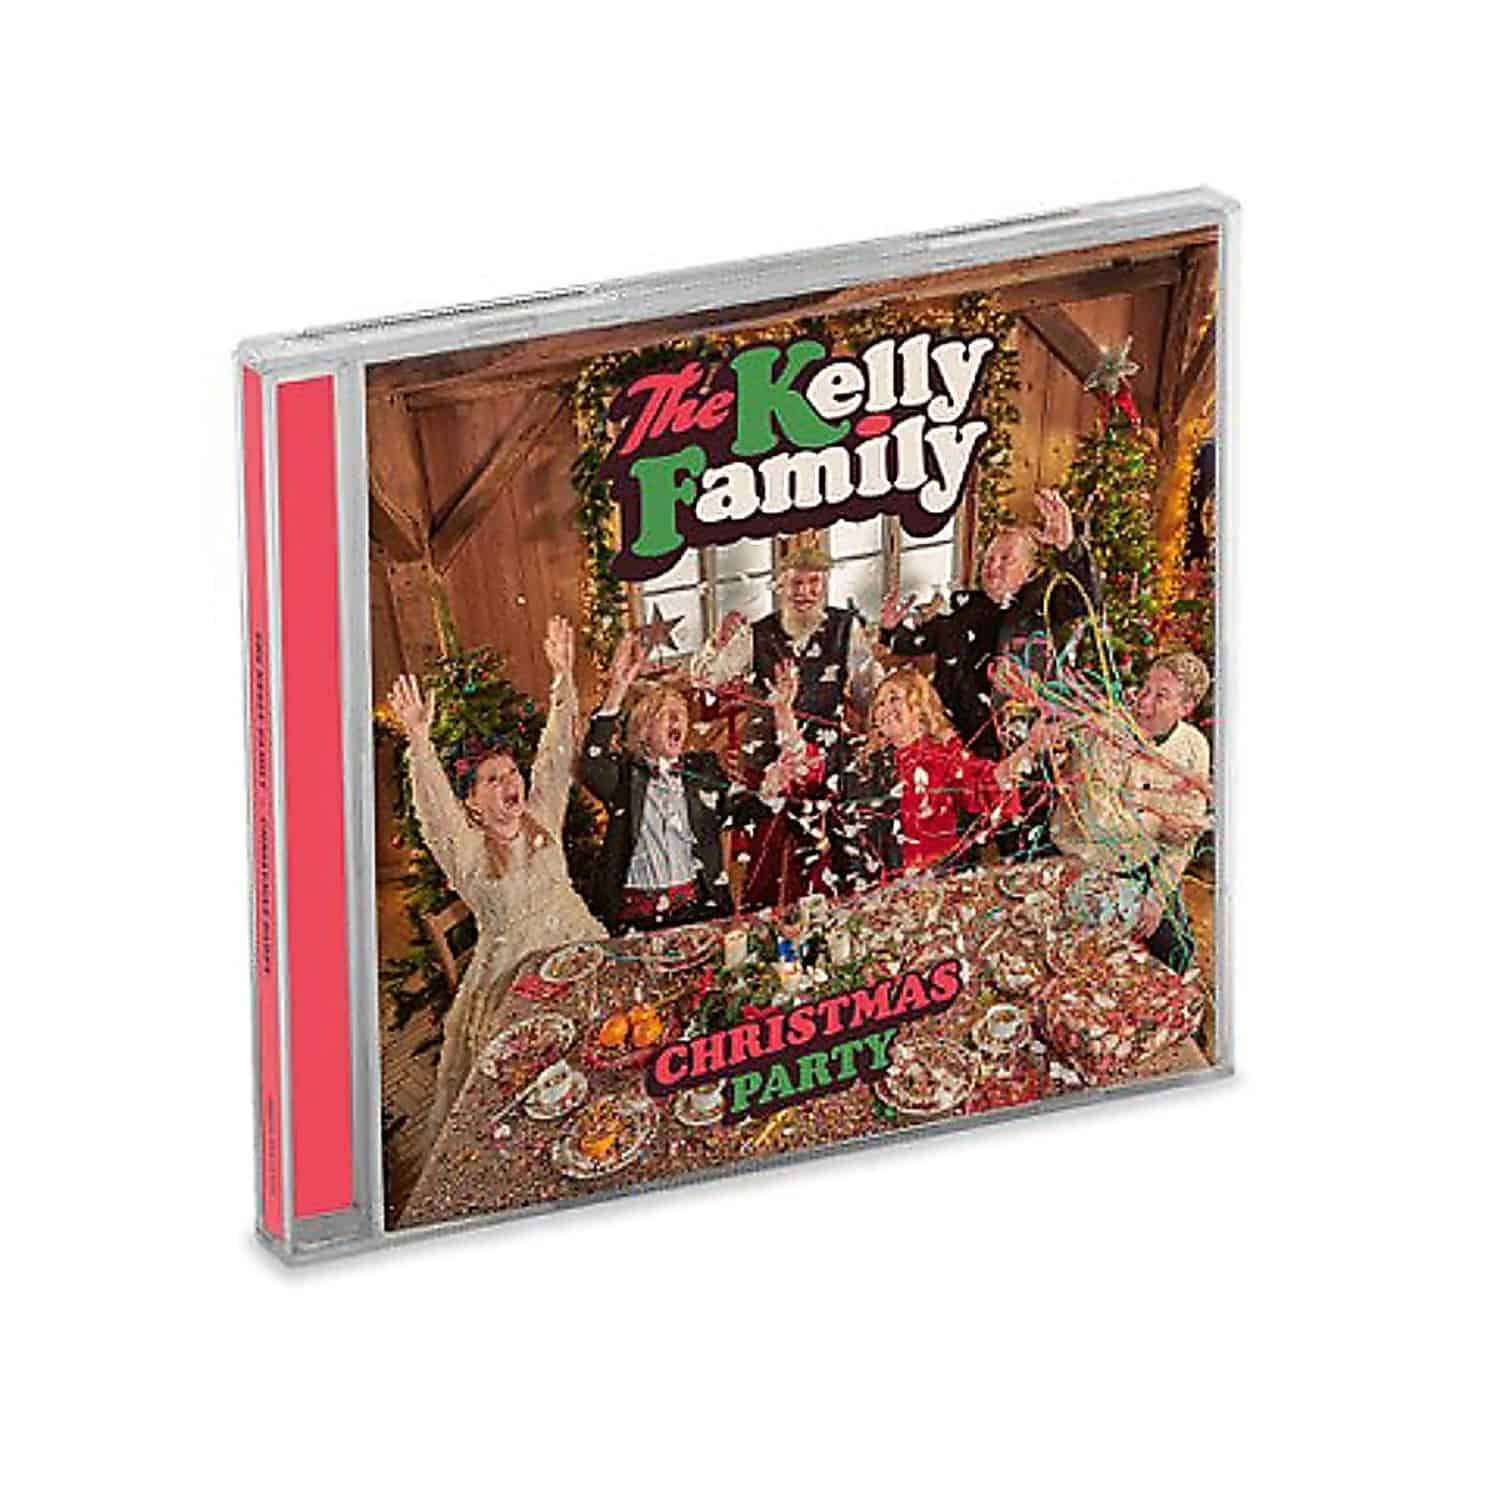  The Kelly Family - CHRISTMAS PARTY 